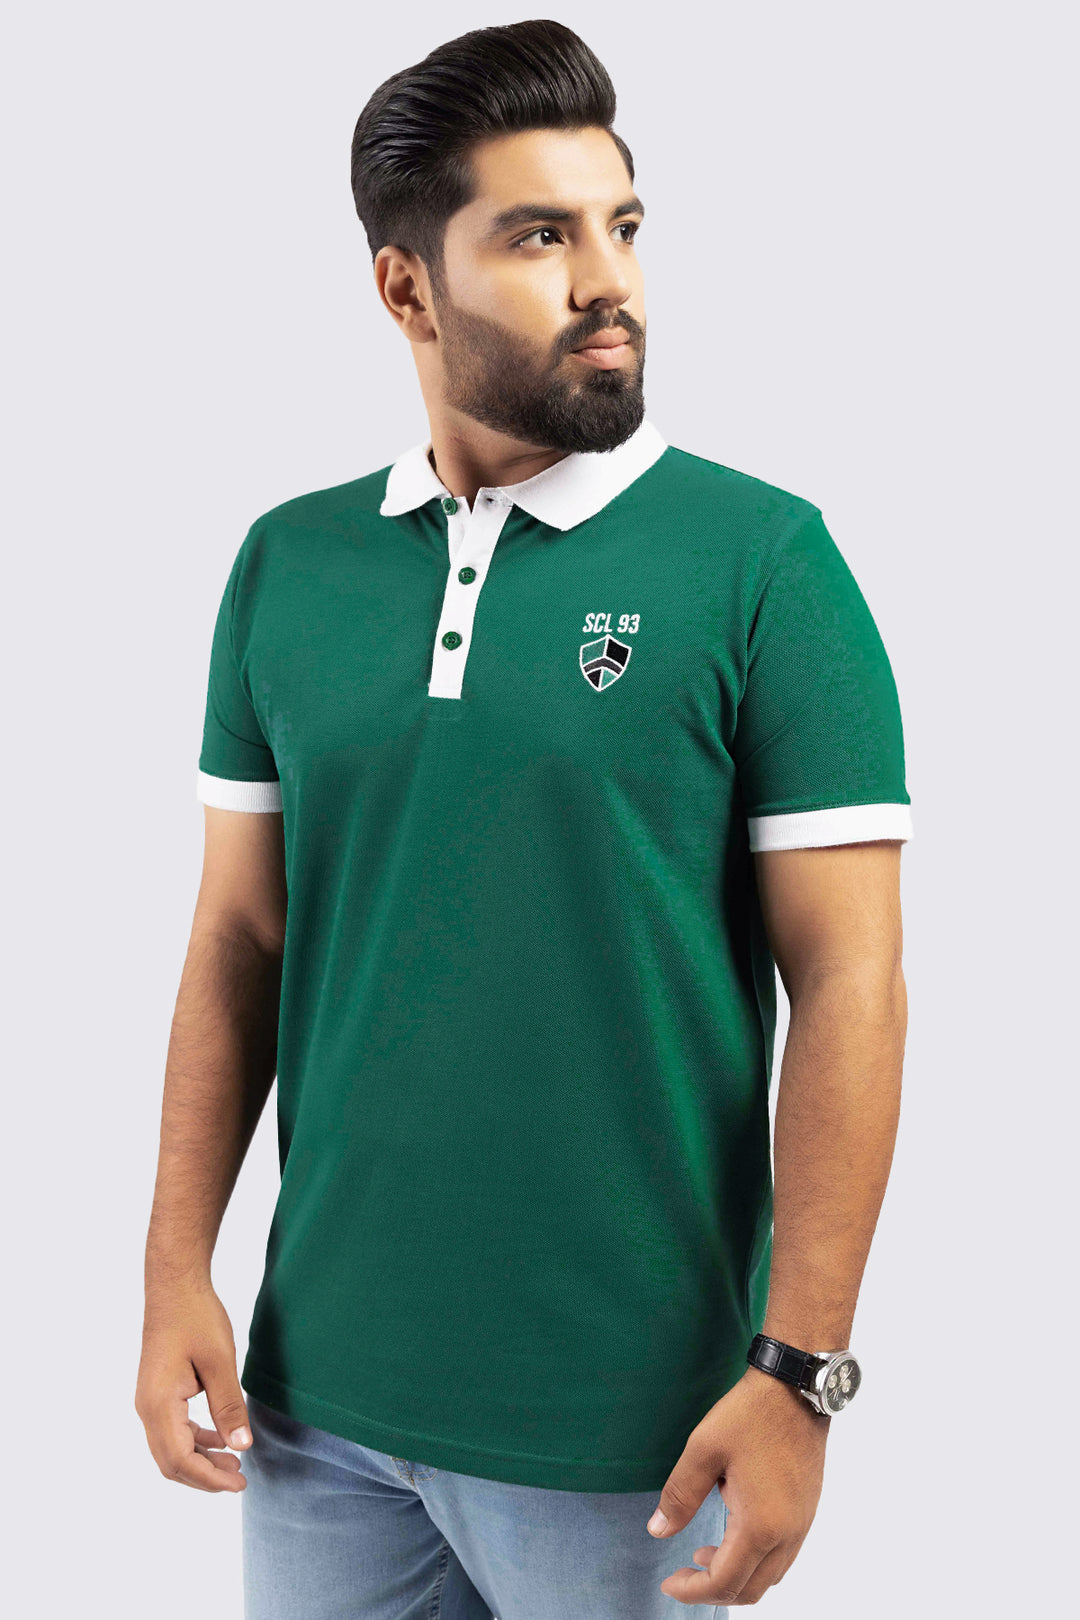 Pasture Green Contrast Collar Polo Shirt (Plus Size) - S23 - MP0221P